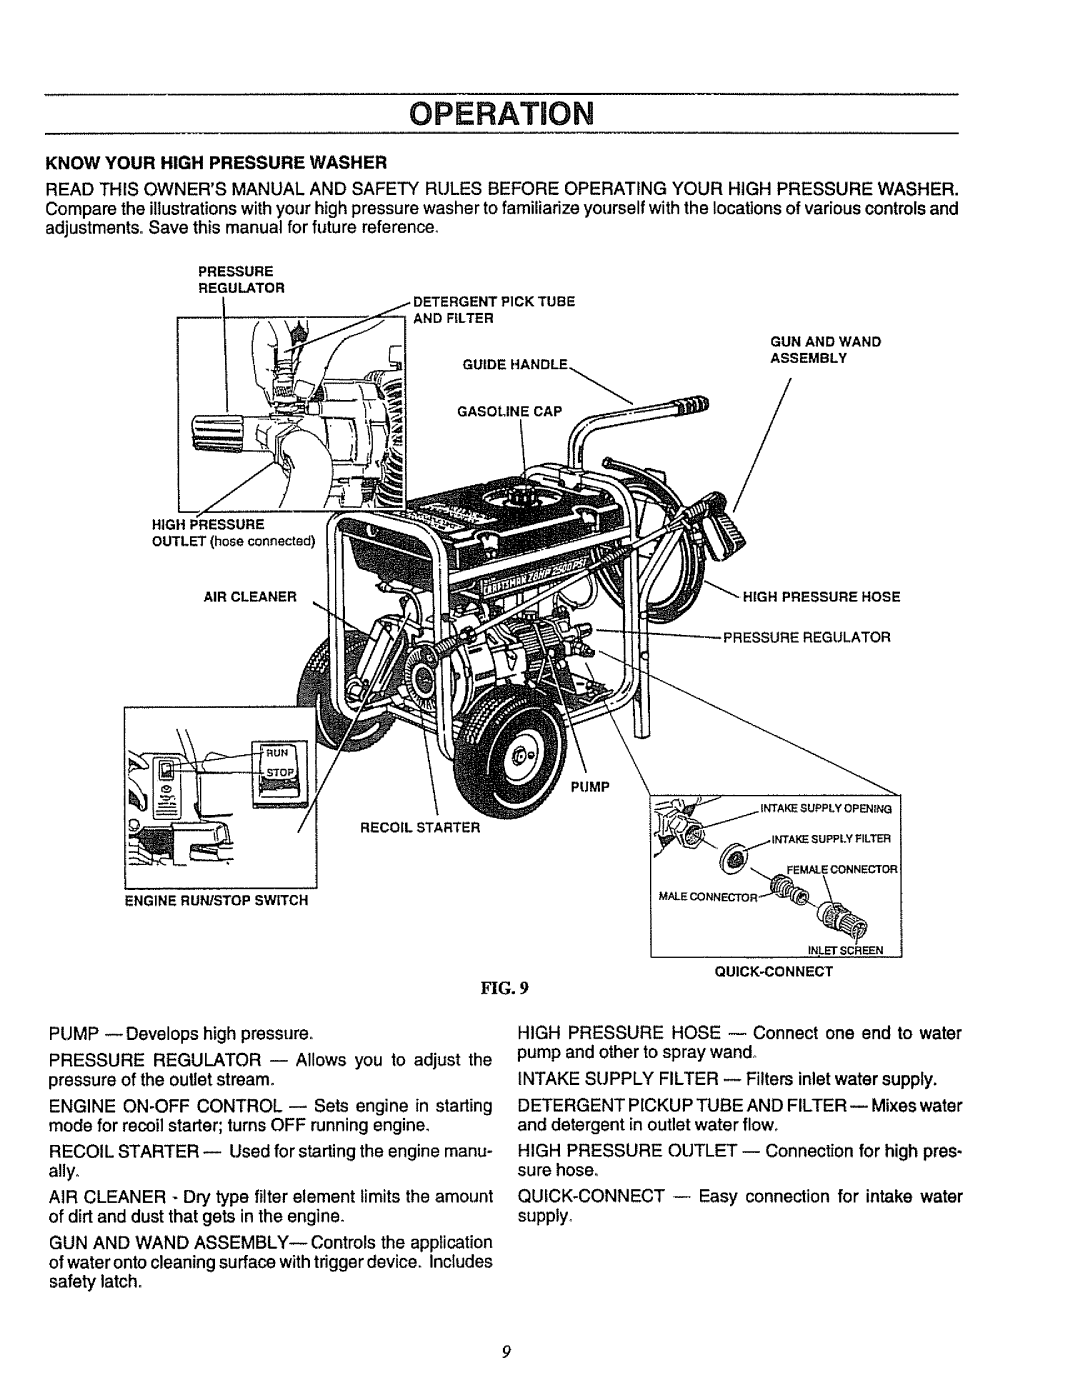 Craftsman 580.751781 owner manual Operation, Know Your High Pressure Washer 